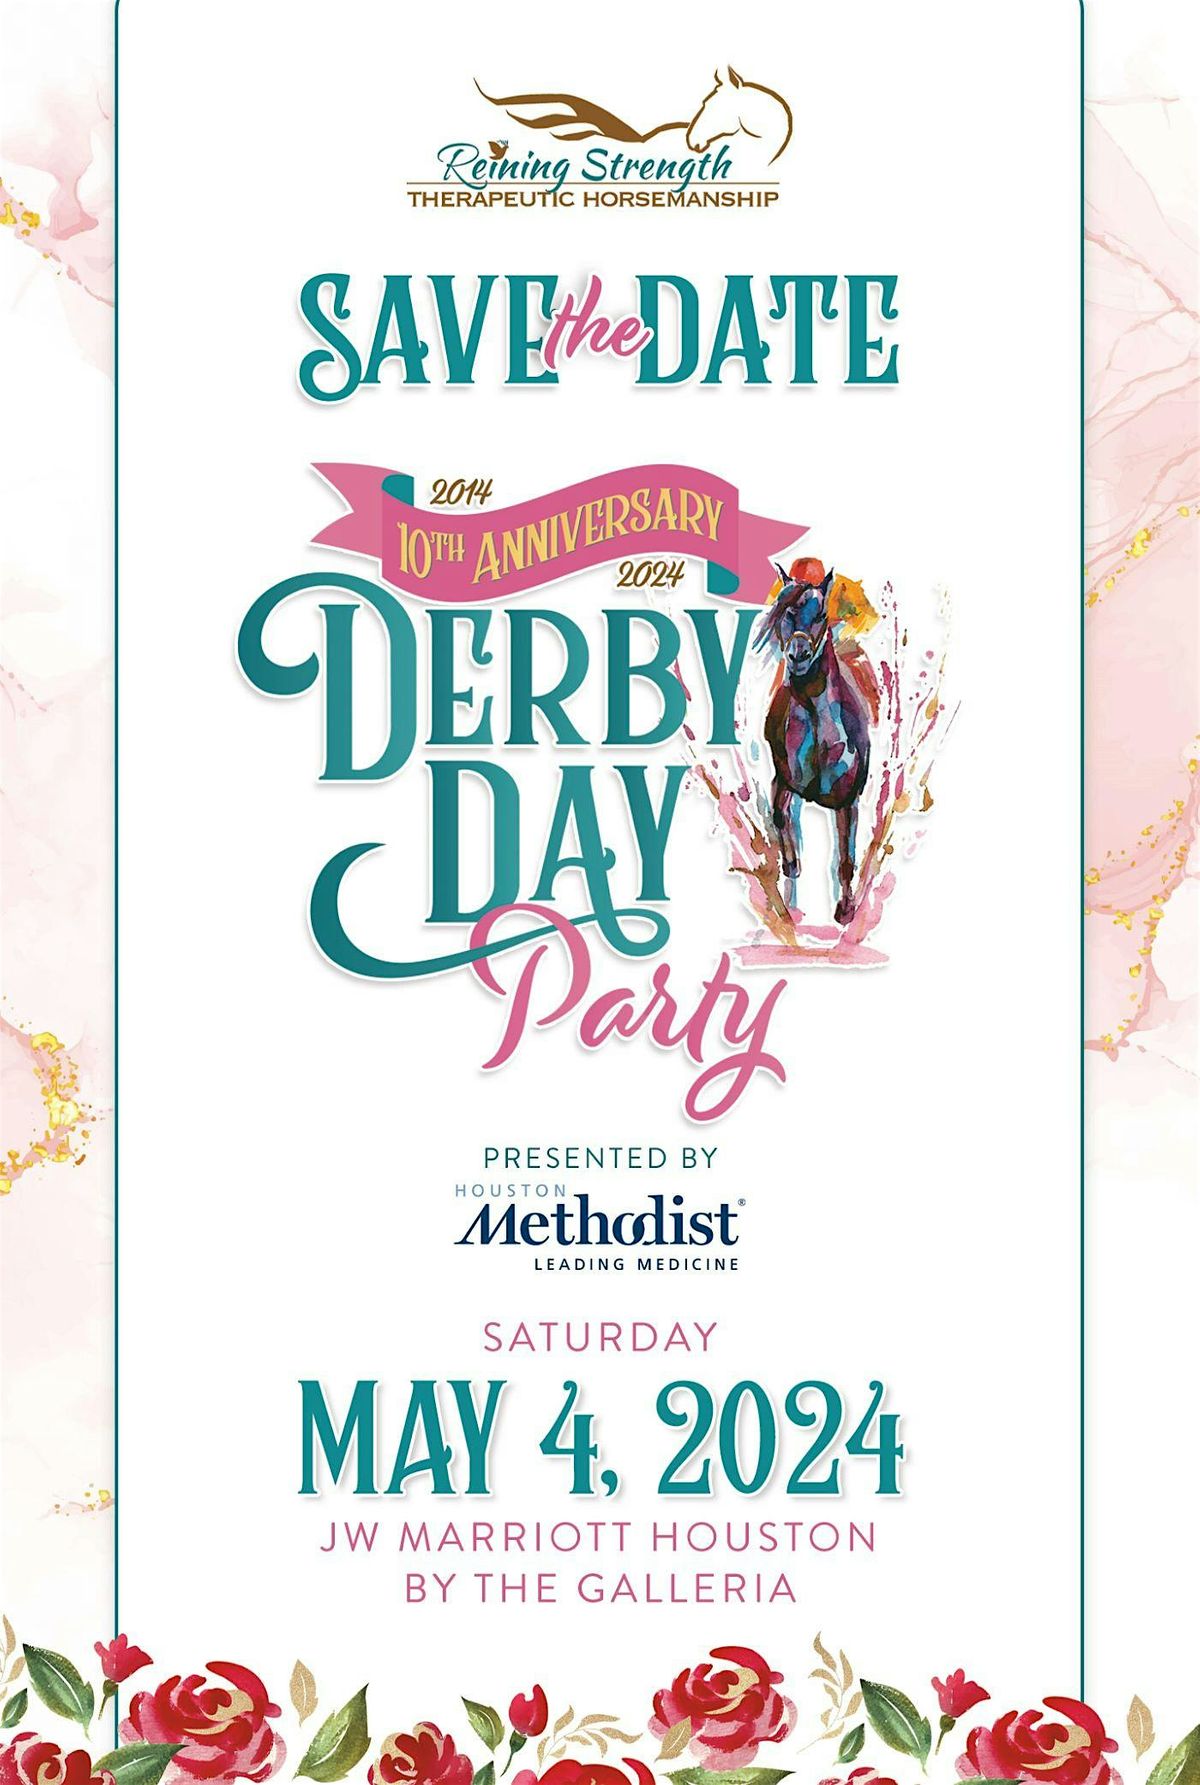 Reining Strength: Derby Day Party Fundraiser